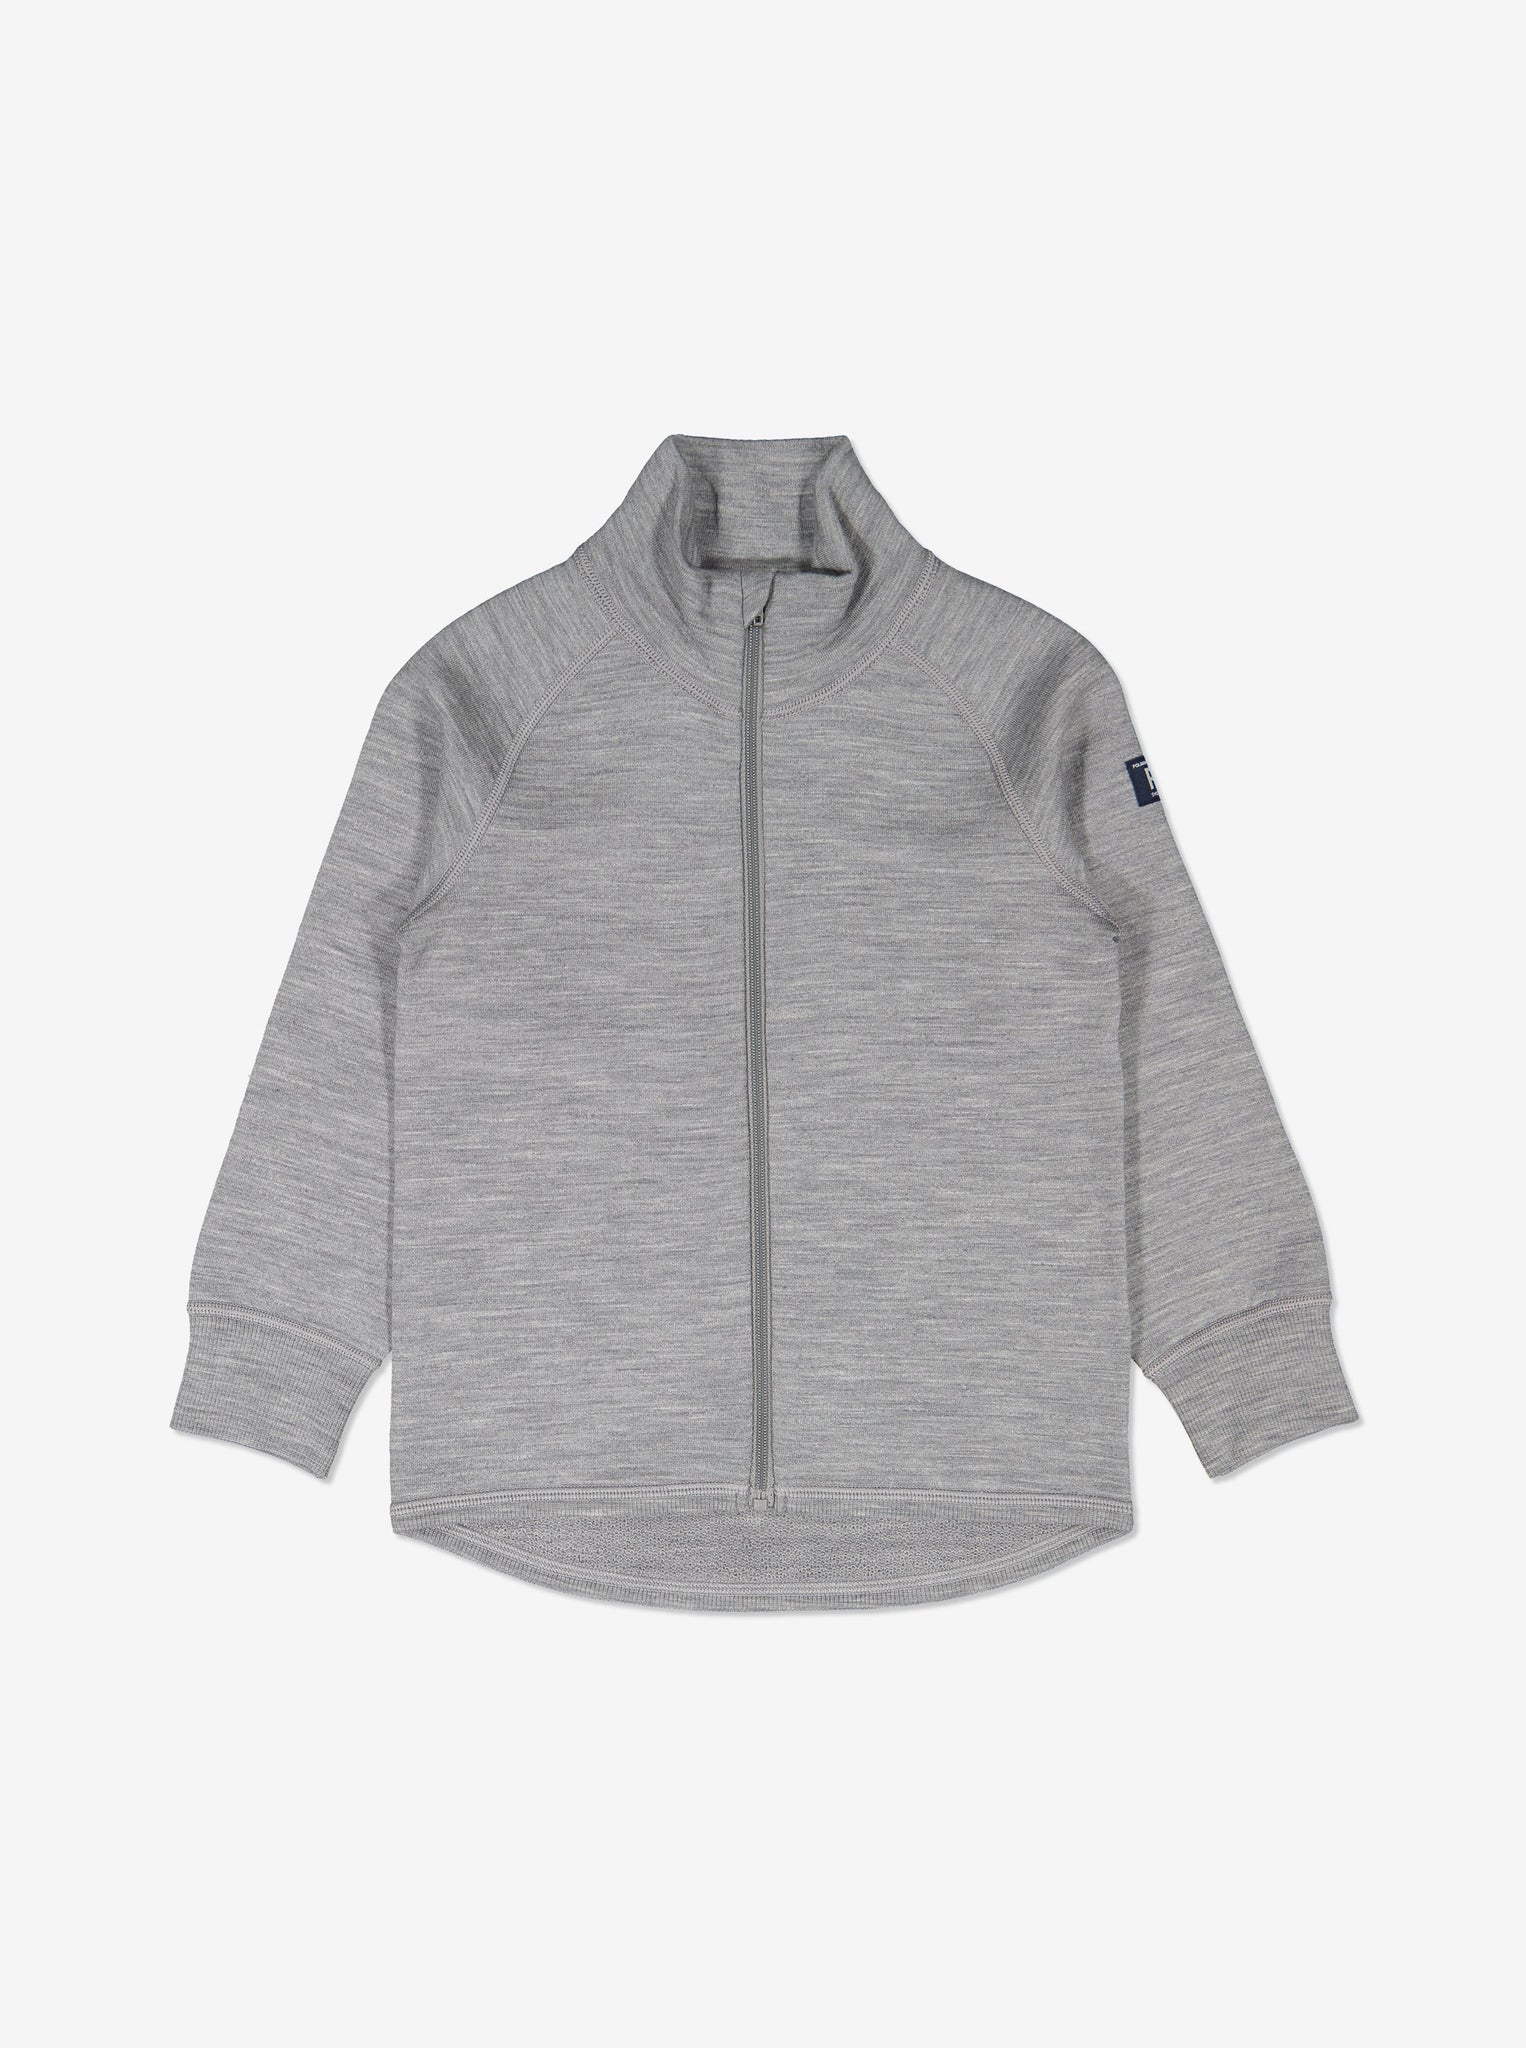  Merino Wool Grey Kids Jacket, warm soft and comfortable, durable quality, ethical long lasting polarn o. pyret